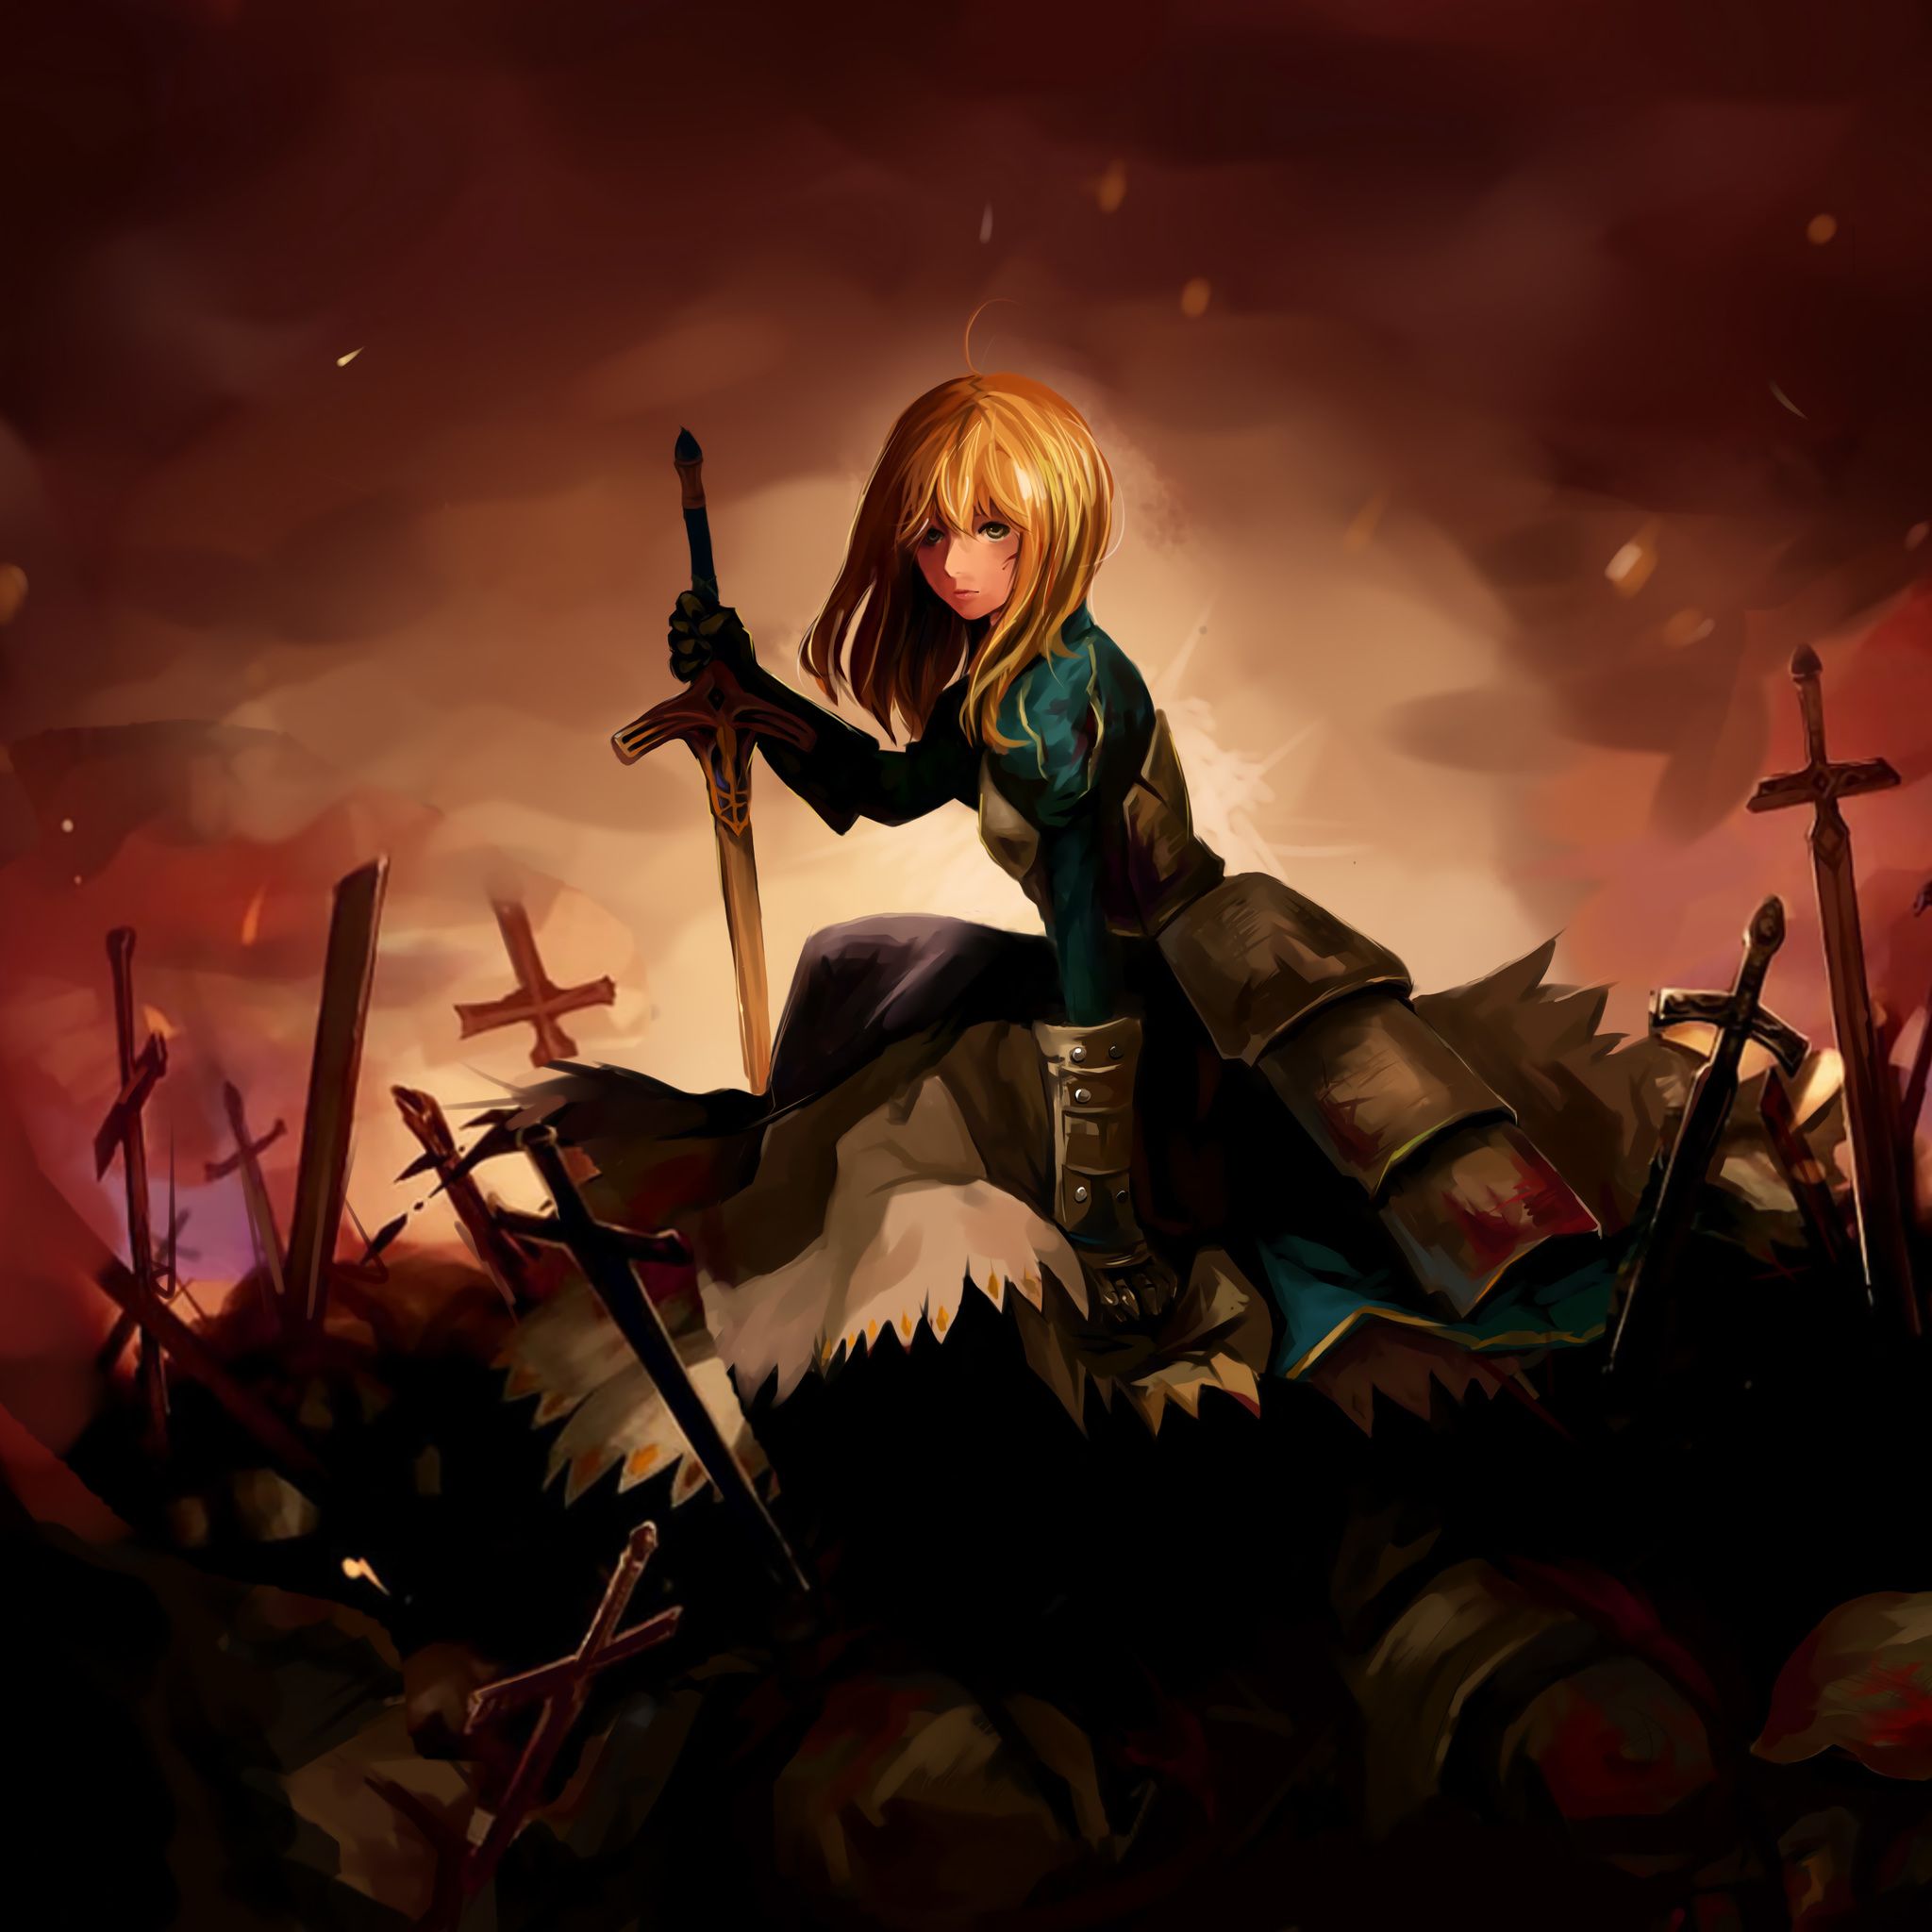 Saber Fate Stay Night Wallpaper